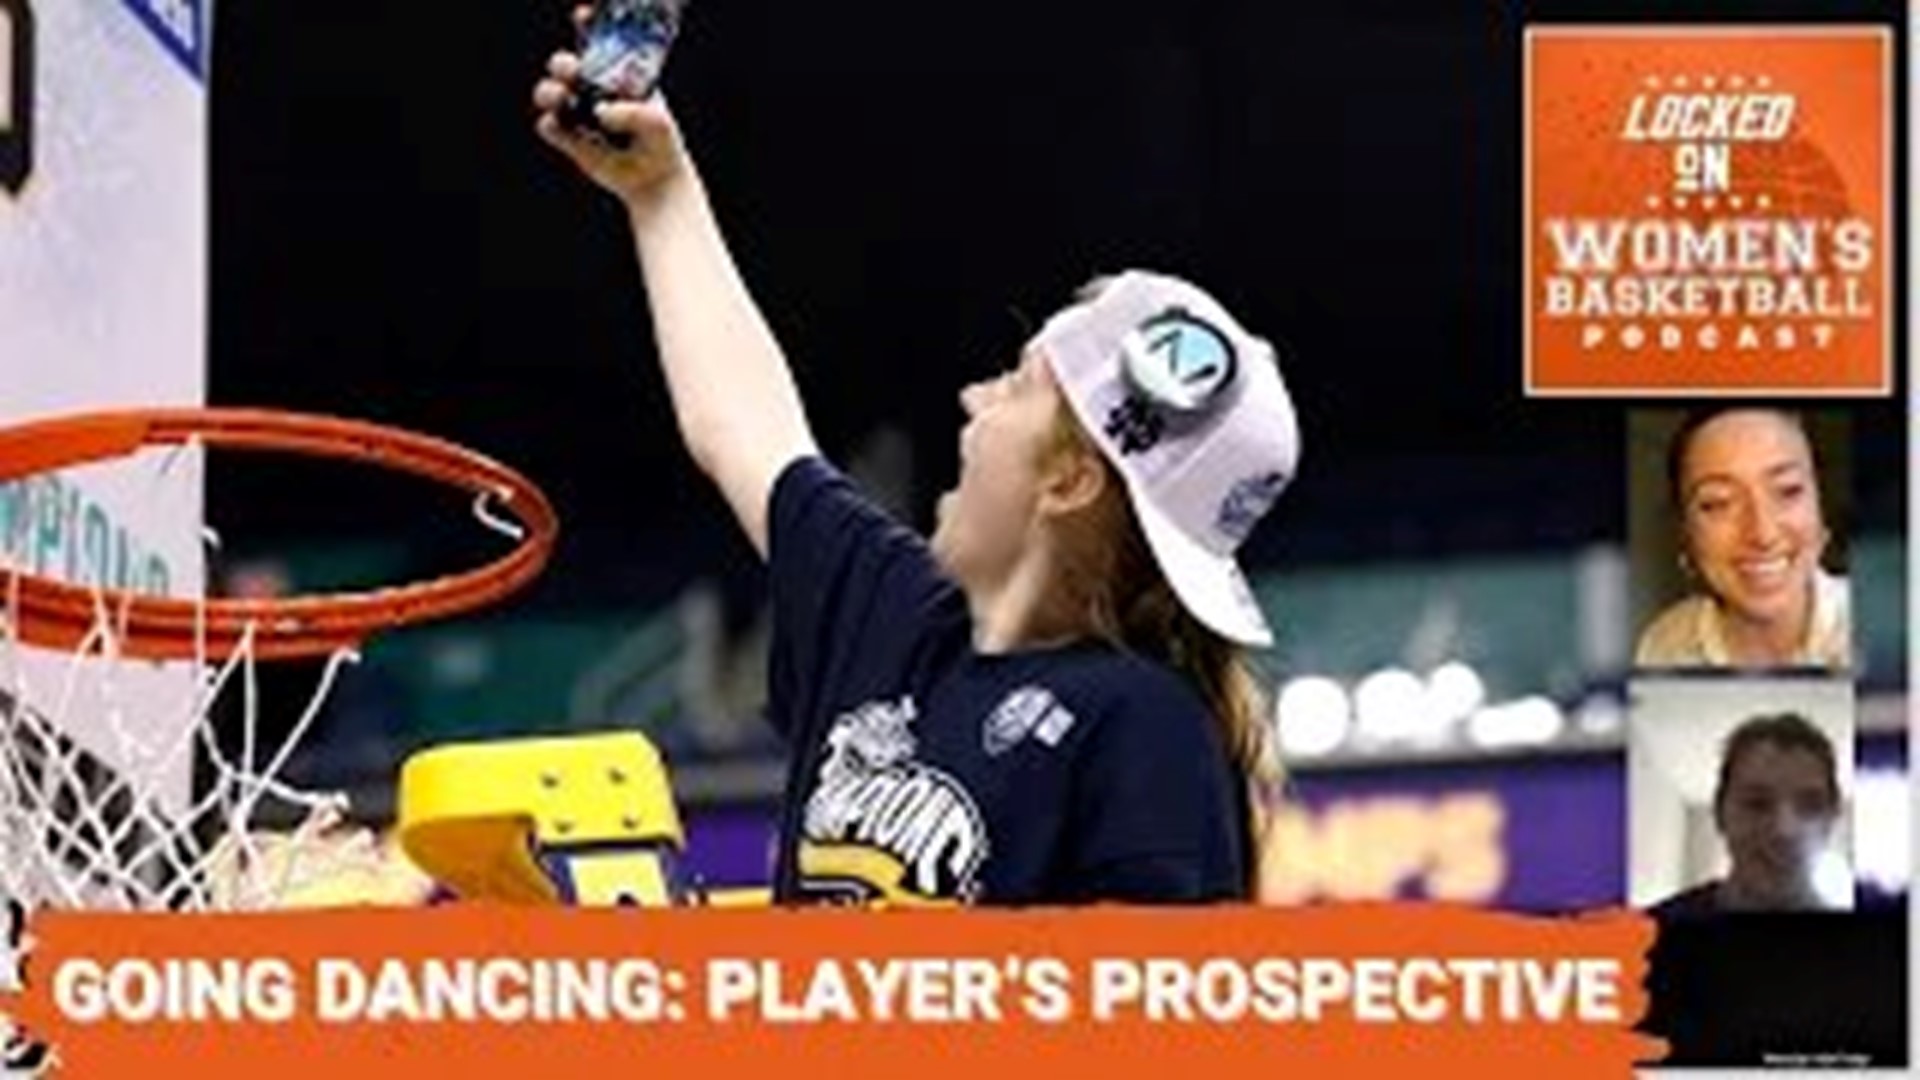 Notre Dame won the ACC Tournament and is going dancing, so Grad Student guard Anna DeWolfe joins host Gigi Speer to dish on the feeling of it all.